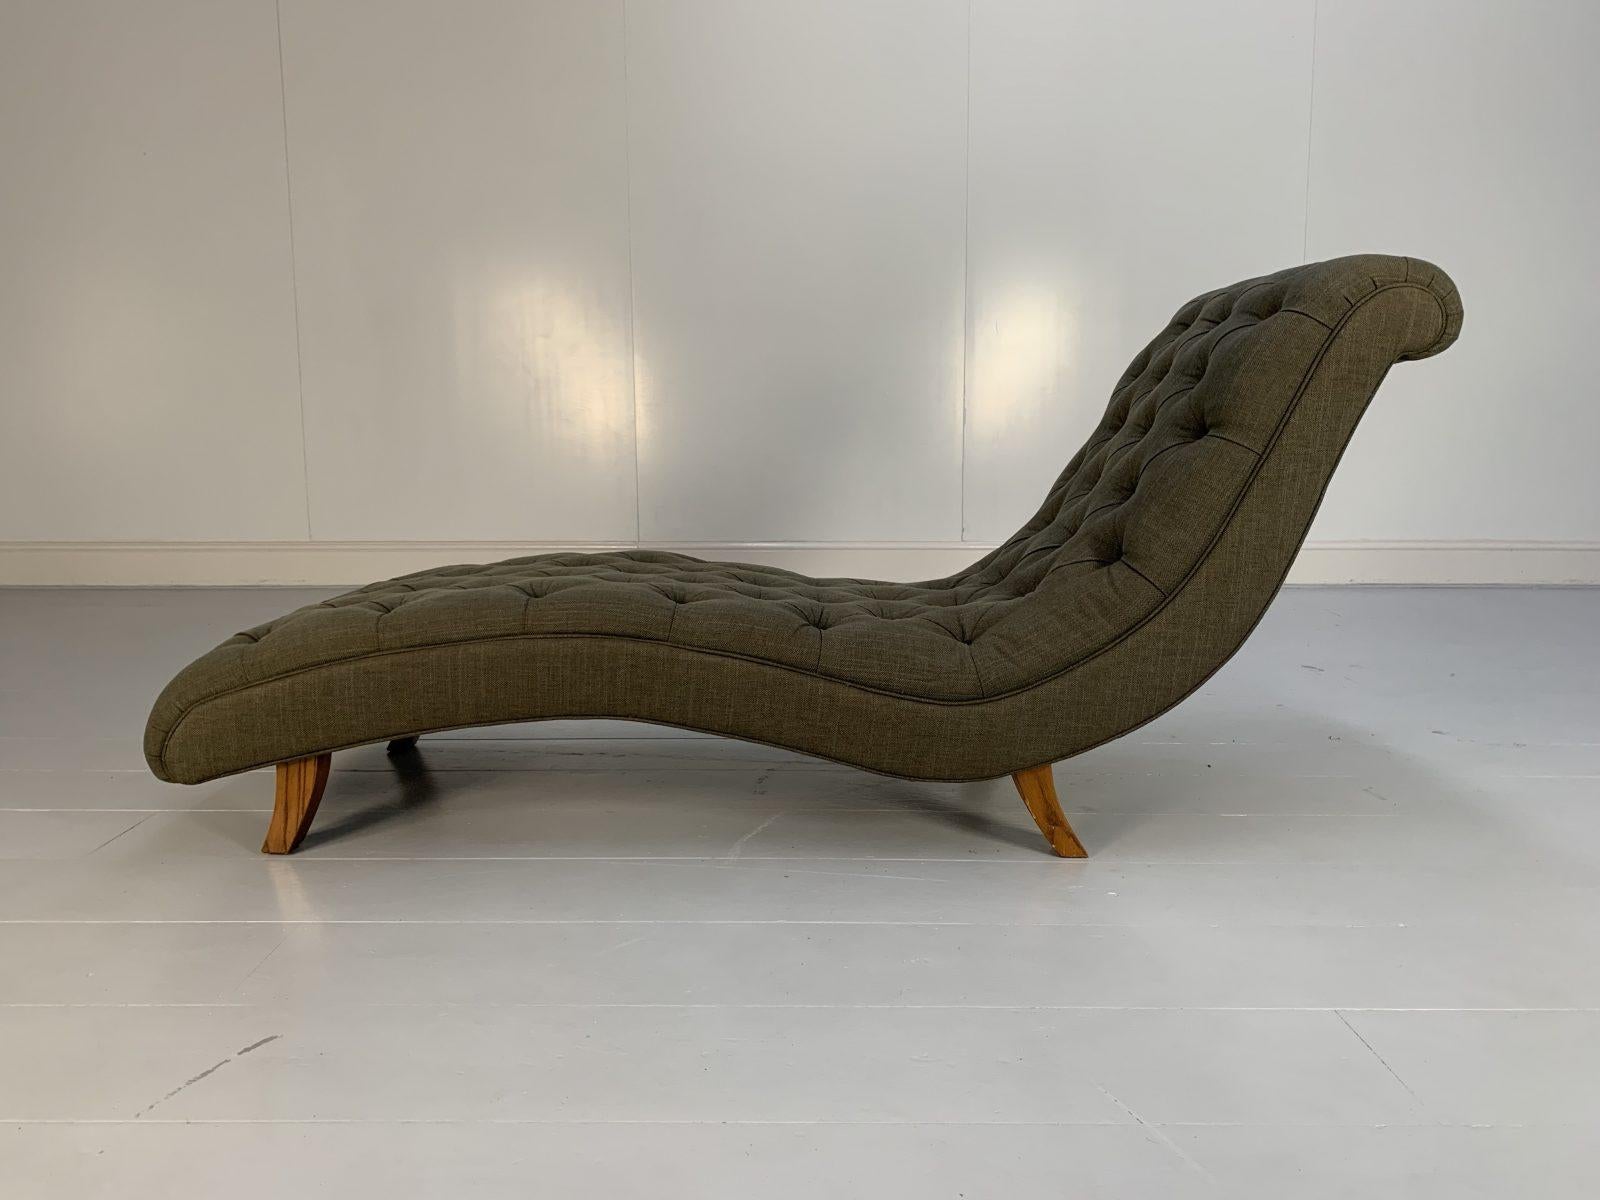 Contemporary George Smith “Brewster” Chaise Sofa in Grey Linen Fabric